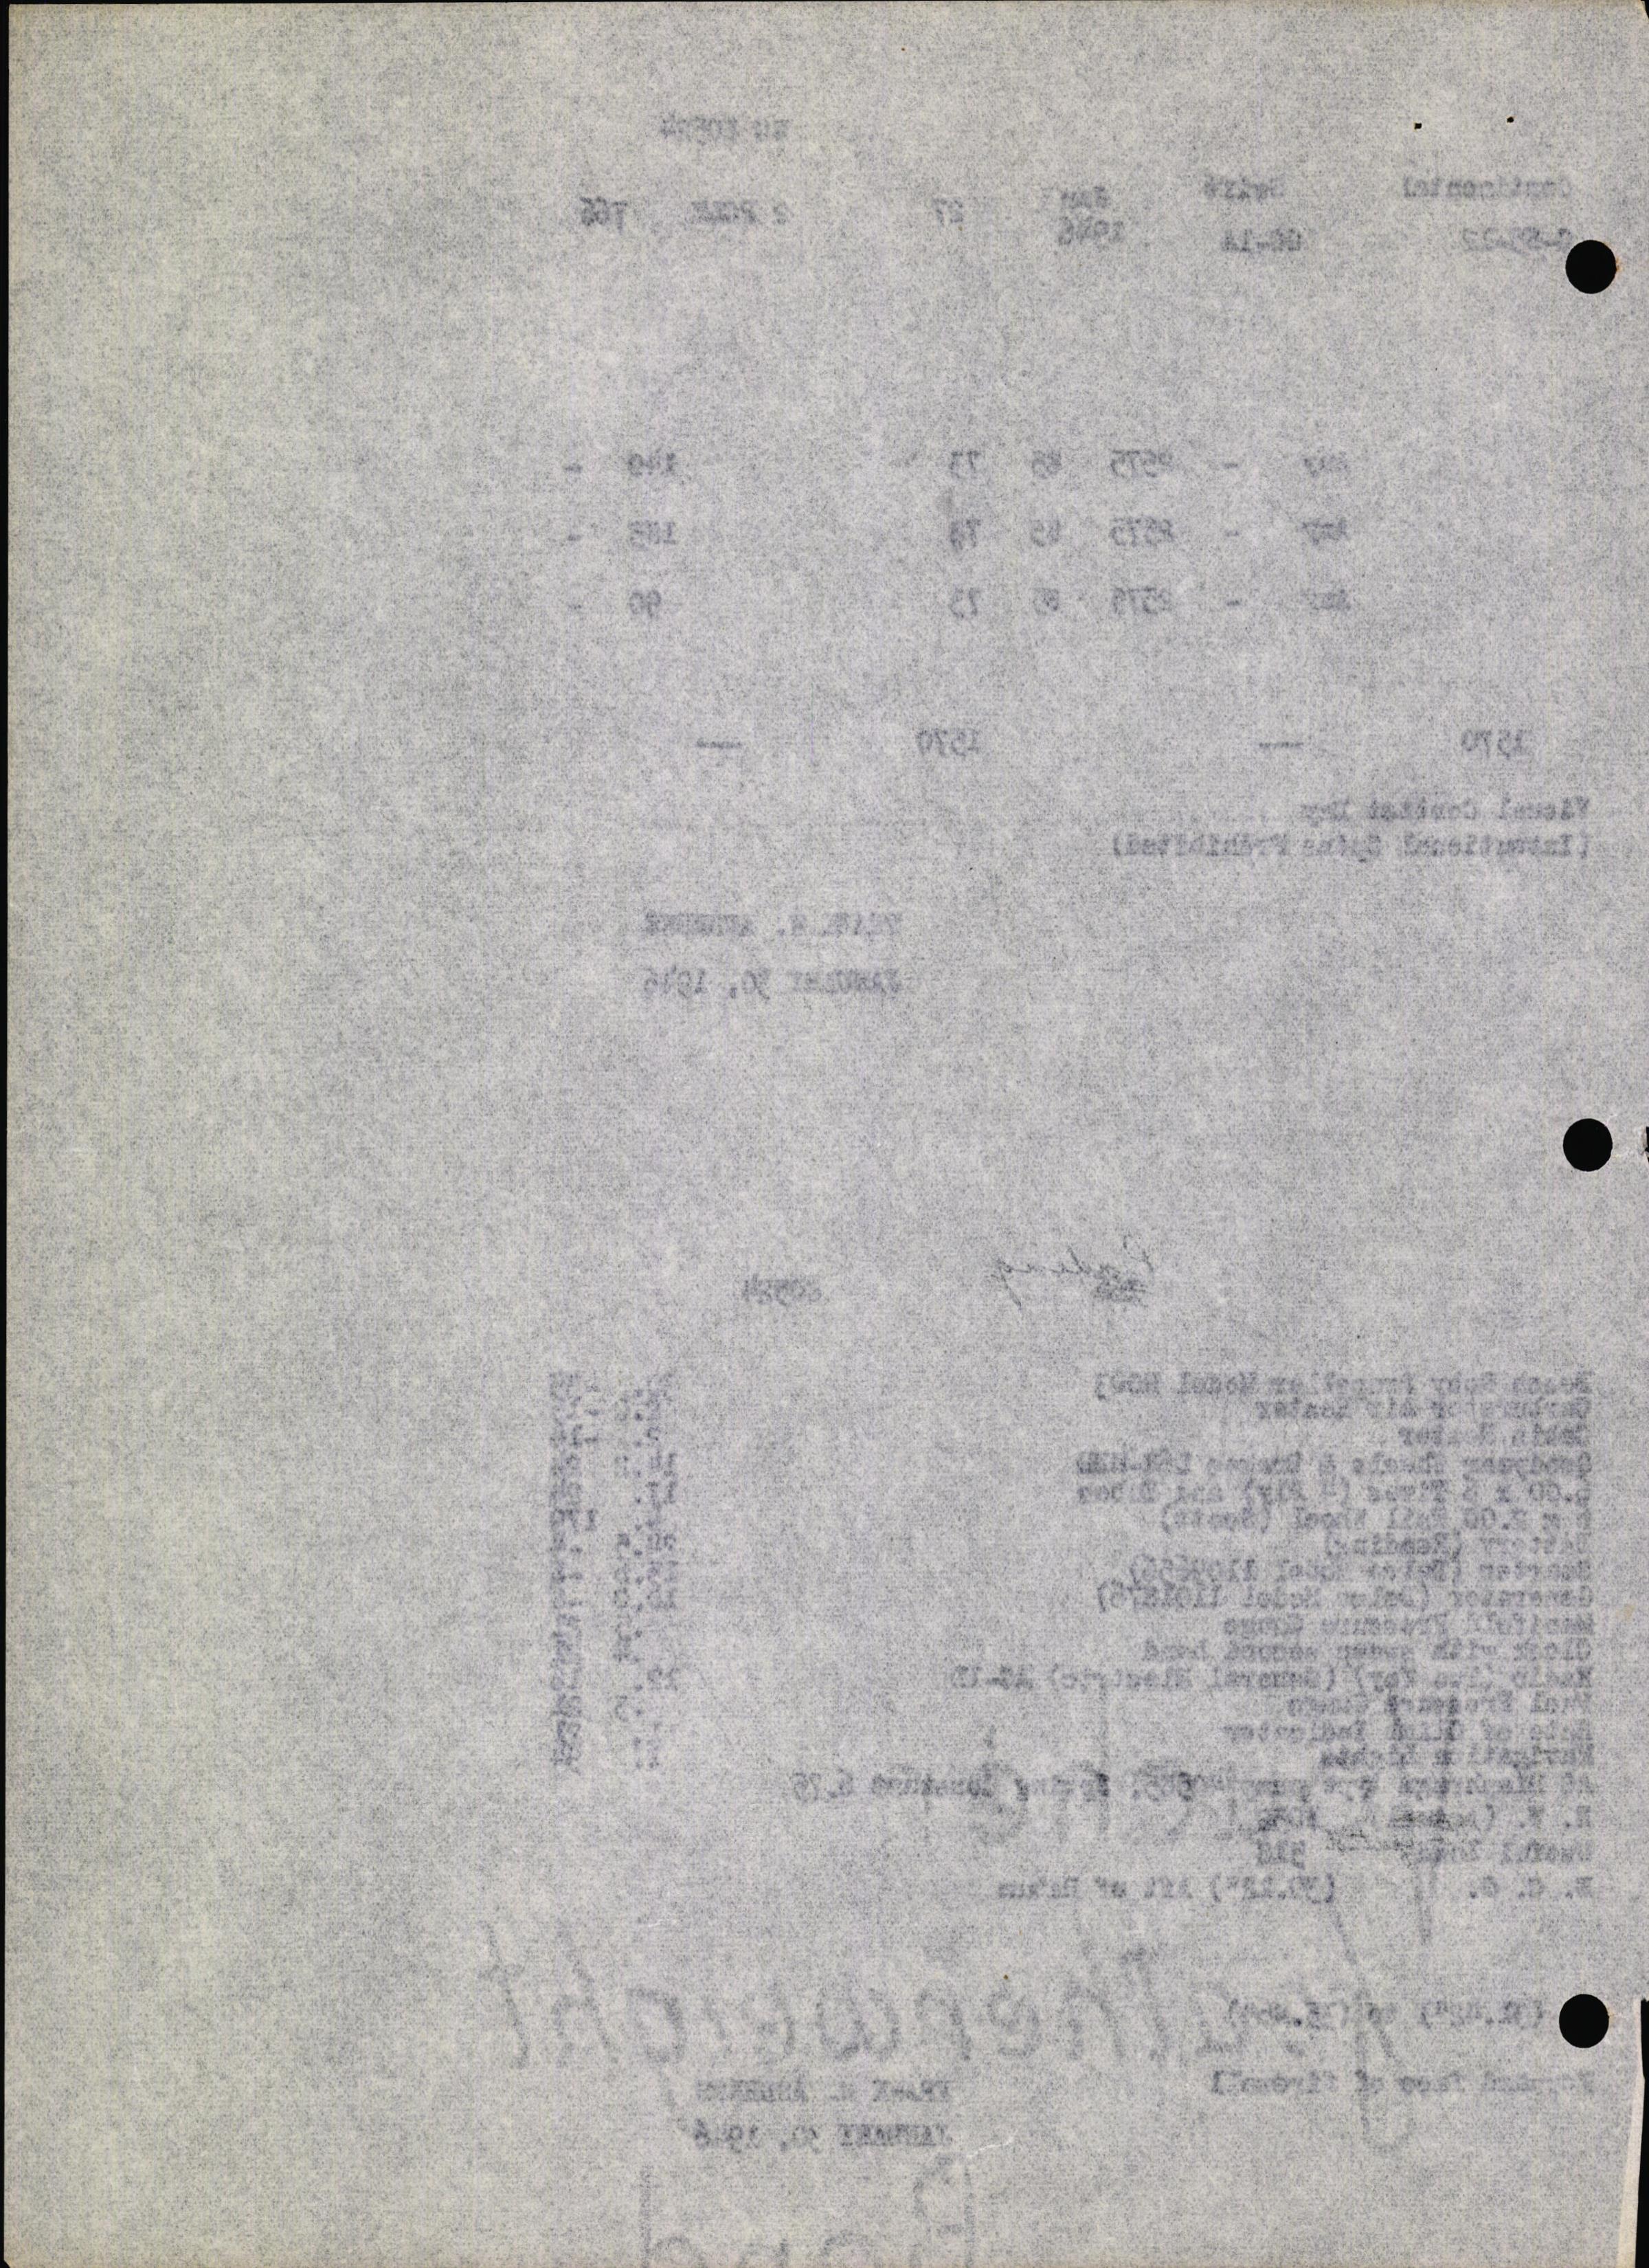 Sample page 6 from AirCorps Library document: Technical Information for Serial Number 27